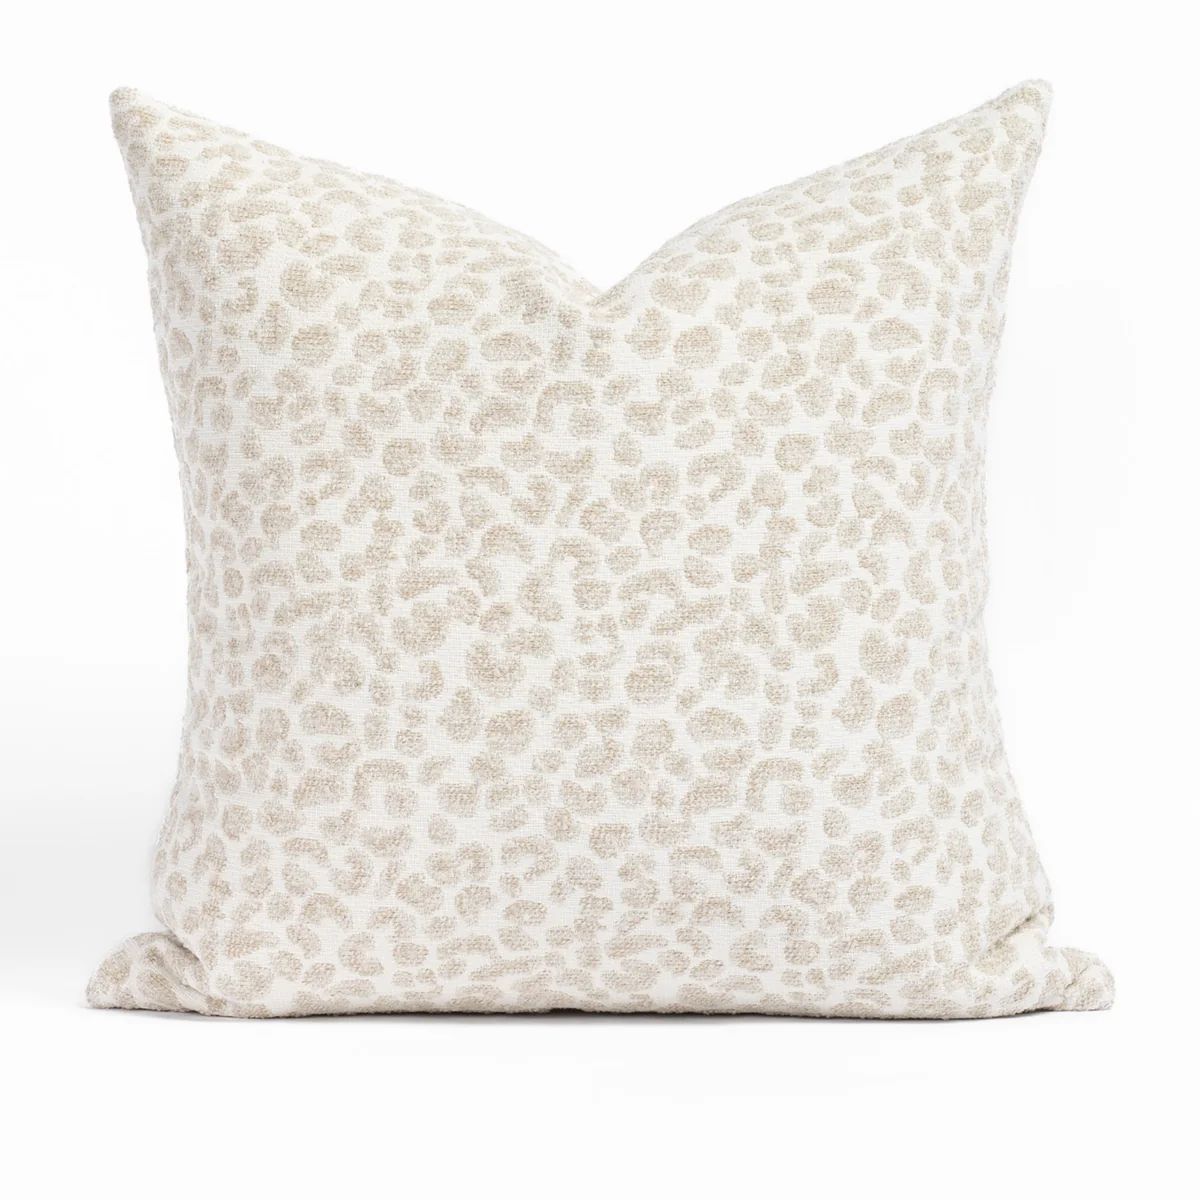 Lucia 20x20 Indoor/Outdoor Pillow, Sand | Tonic Living